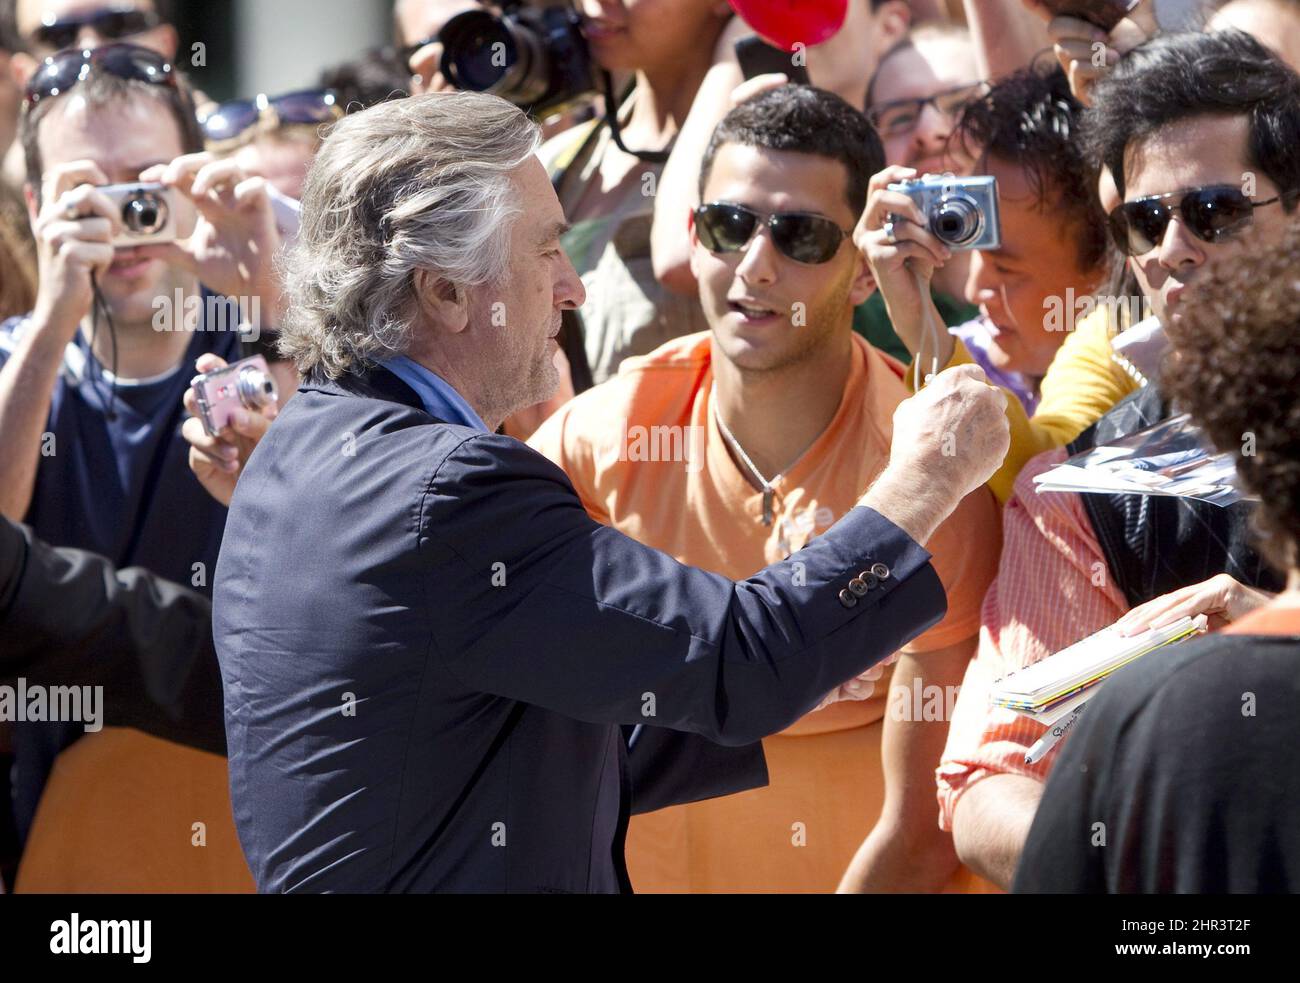 Actor Robert De Niro signs autographs at the gala for the film 'Killer Elite' during the Toronto International Film Festival in Toronto Saturday, September 10, 2011. THE CANADIAN PRESS/Darren Calabrese Stock Photo